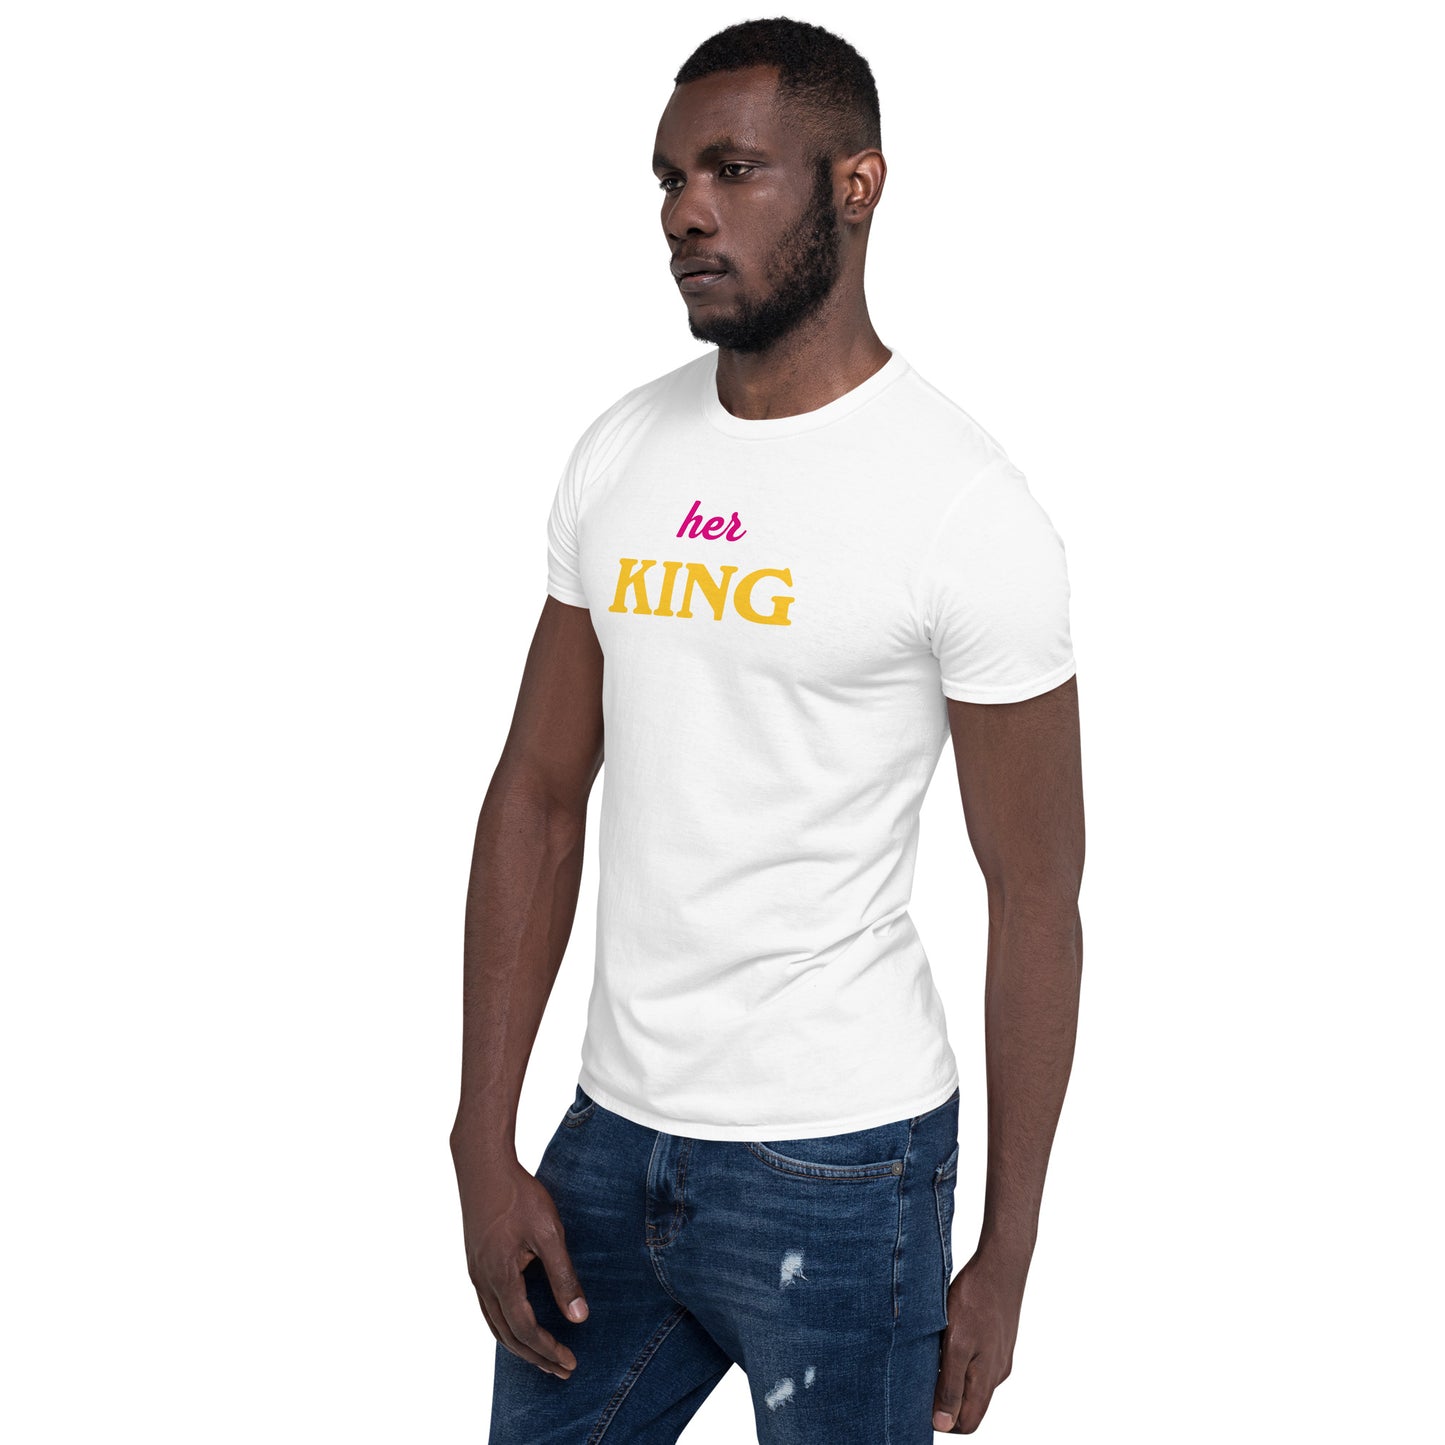 Her King Softstyle T-Shirt white turn